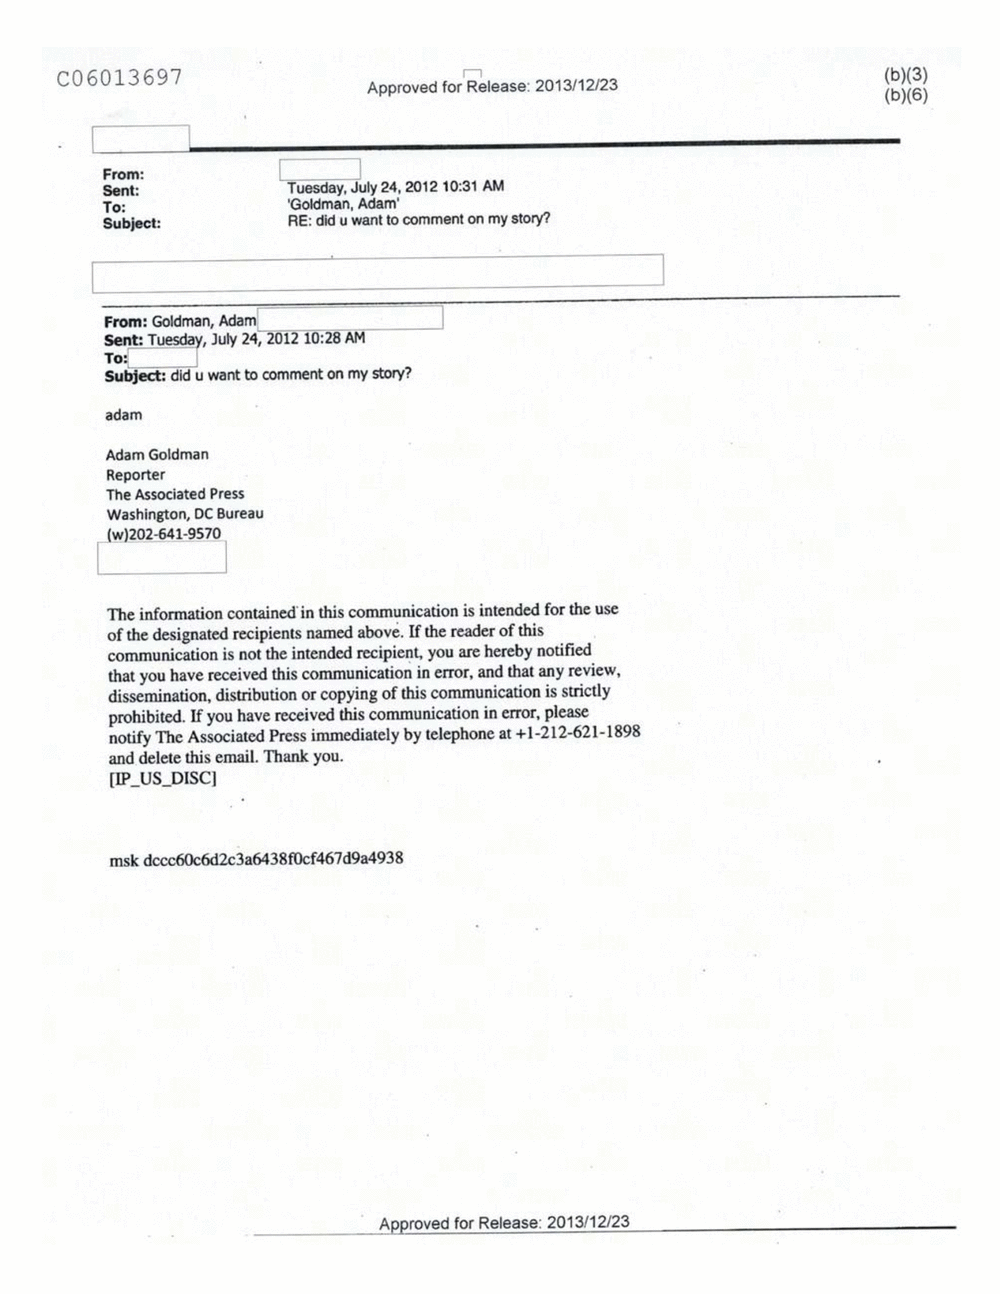 Page 558 from Email Correspondence Between Reporters and CIA Flacks